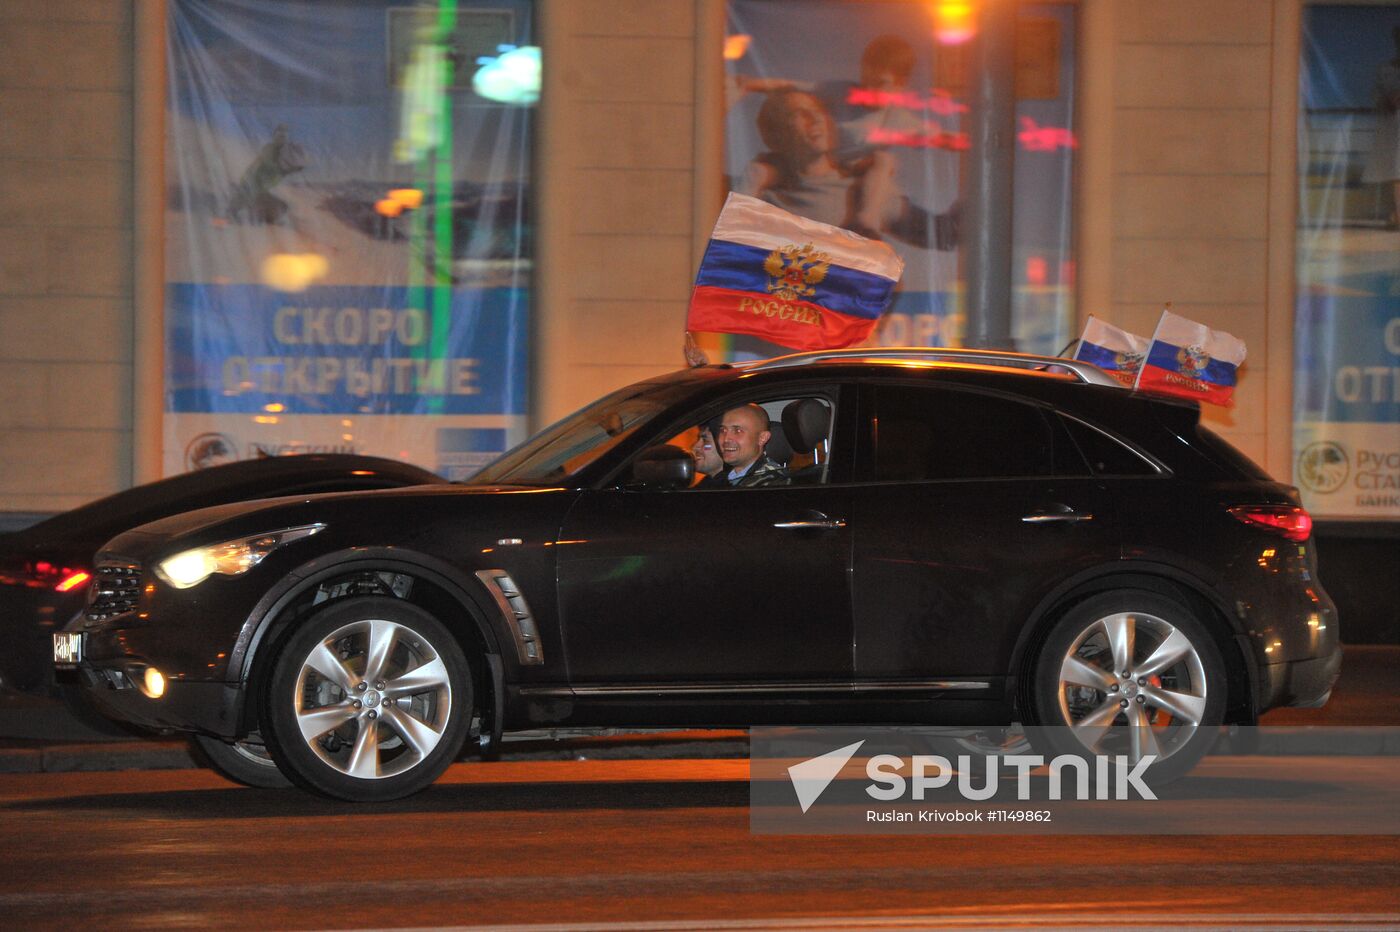 Celebrating victory of Russian football team on Moscow streets